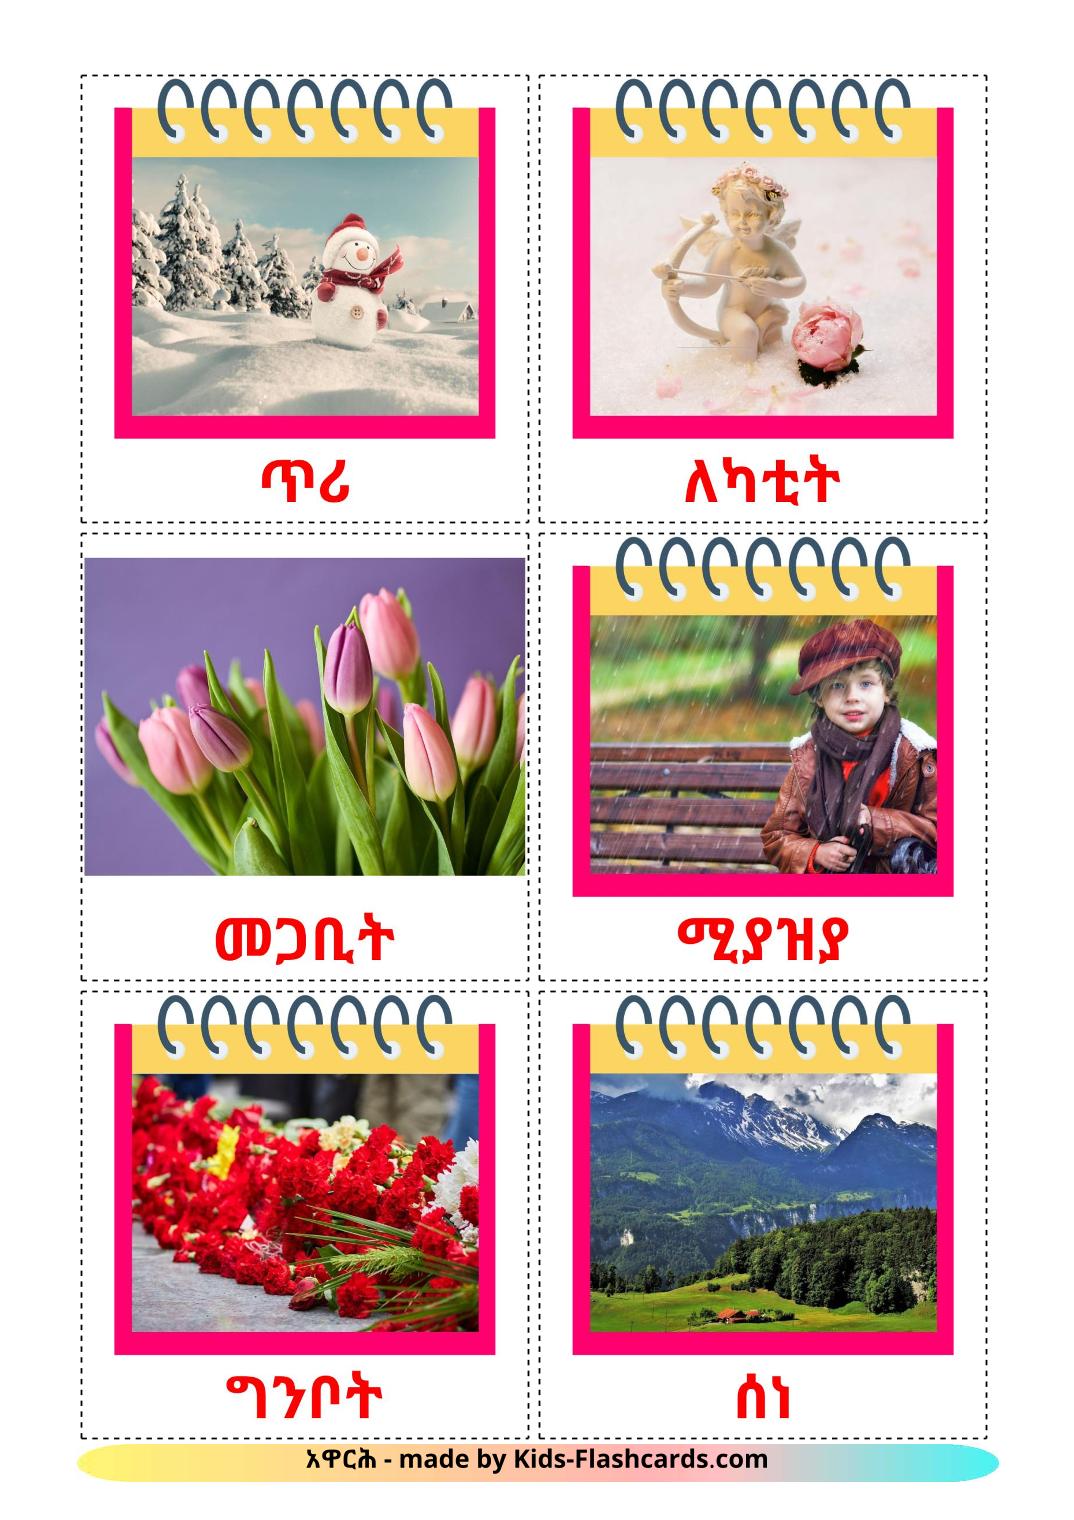 Months of the Year - 12 Free Printable tigrigna(Eritrea) Flashcards 